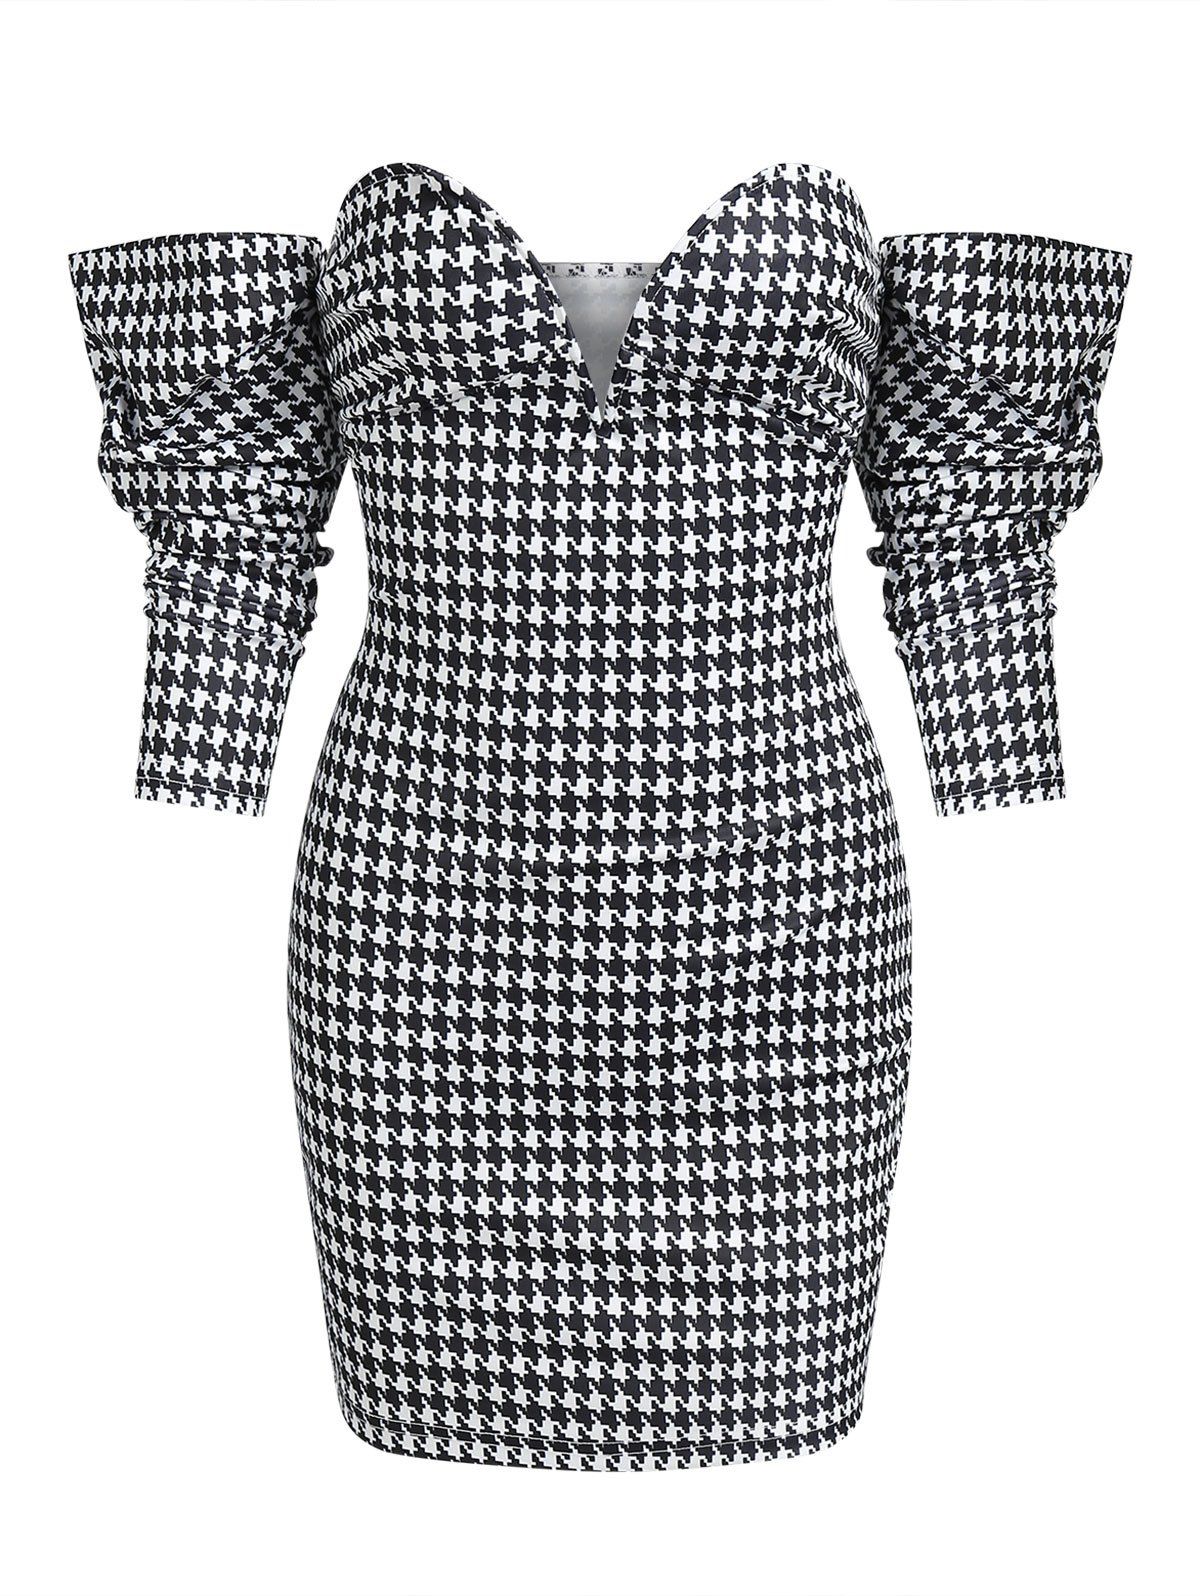 Off The Shoulder Houndstooth Print Bodycon Dress - BLACK S